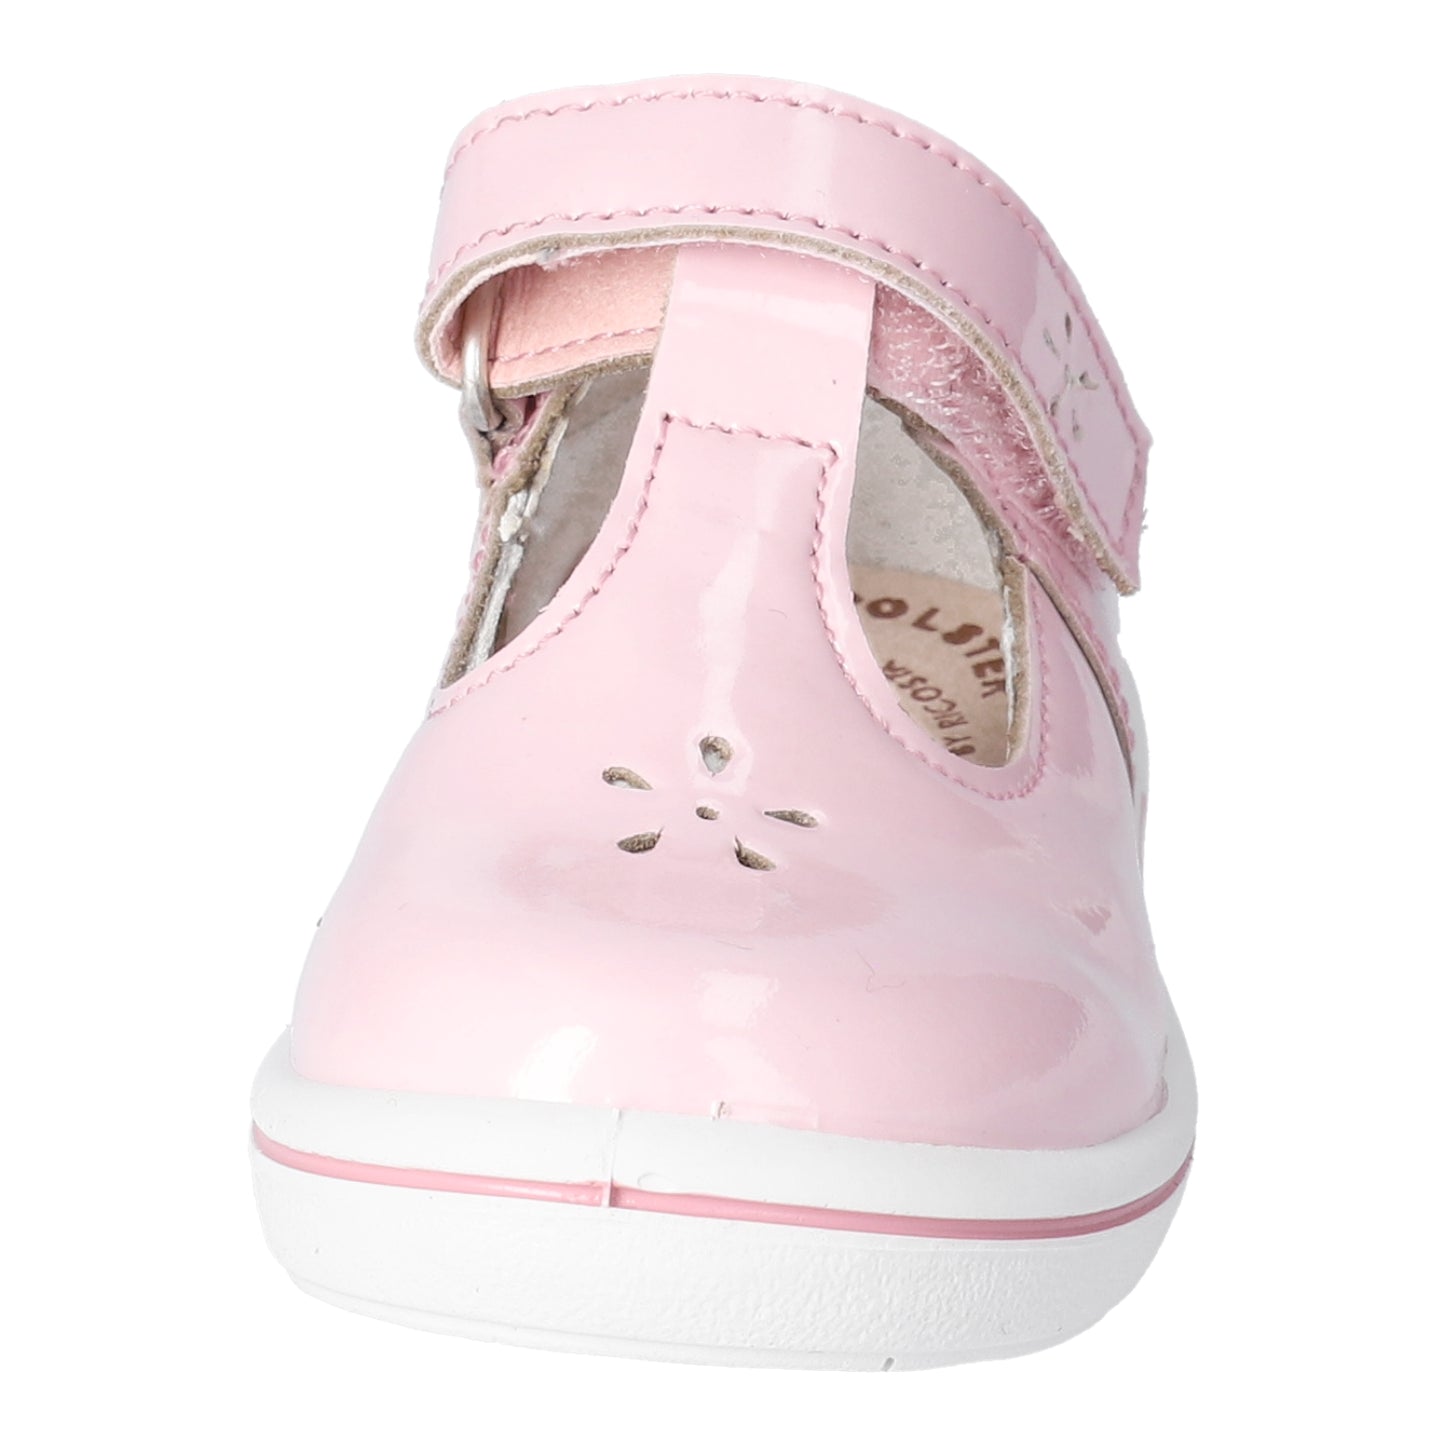 Winona T-Bar Girl's shoe in Blush Pink Patent